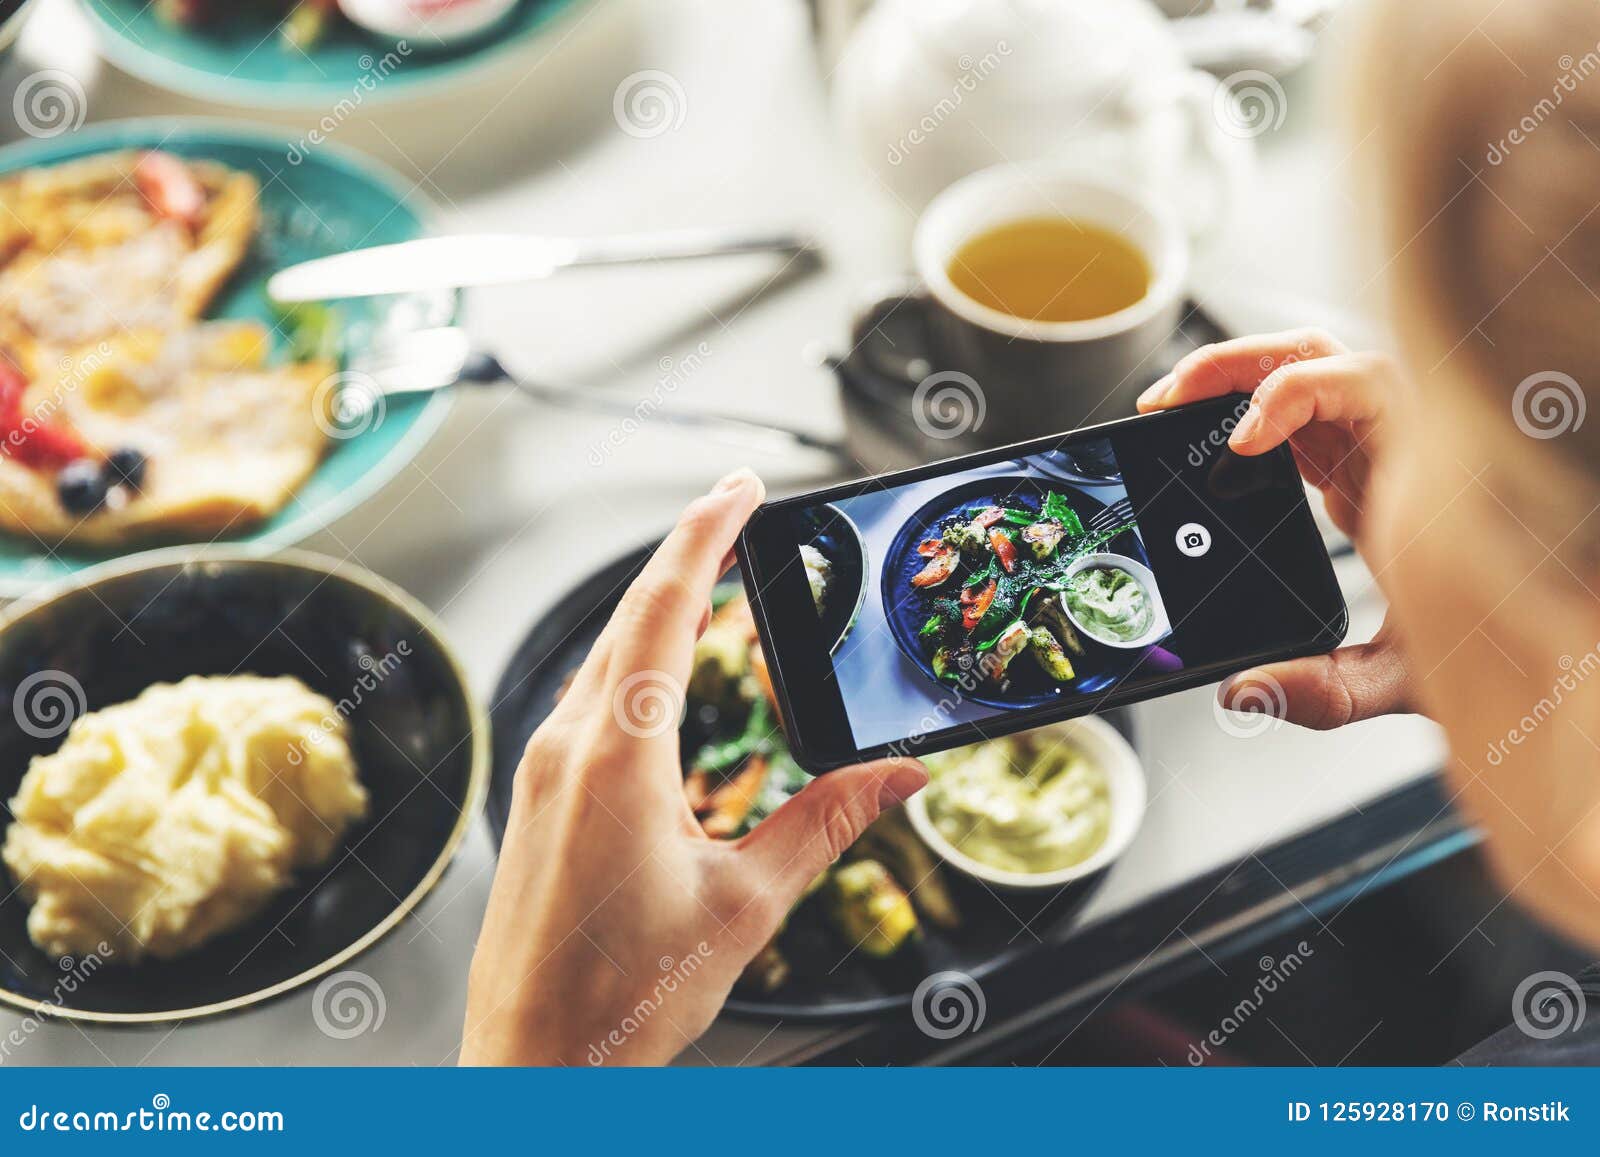 woman with smart phone taking picture of food at restaurant